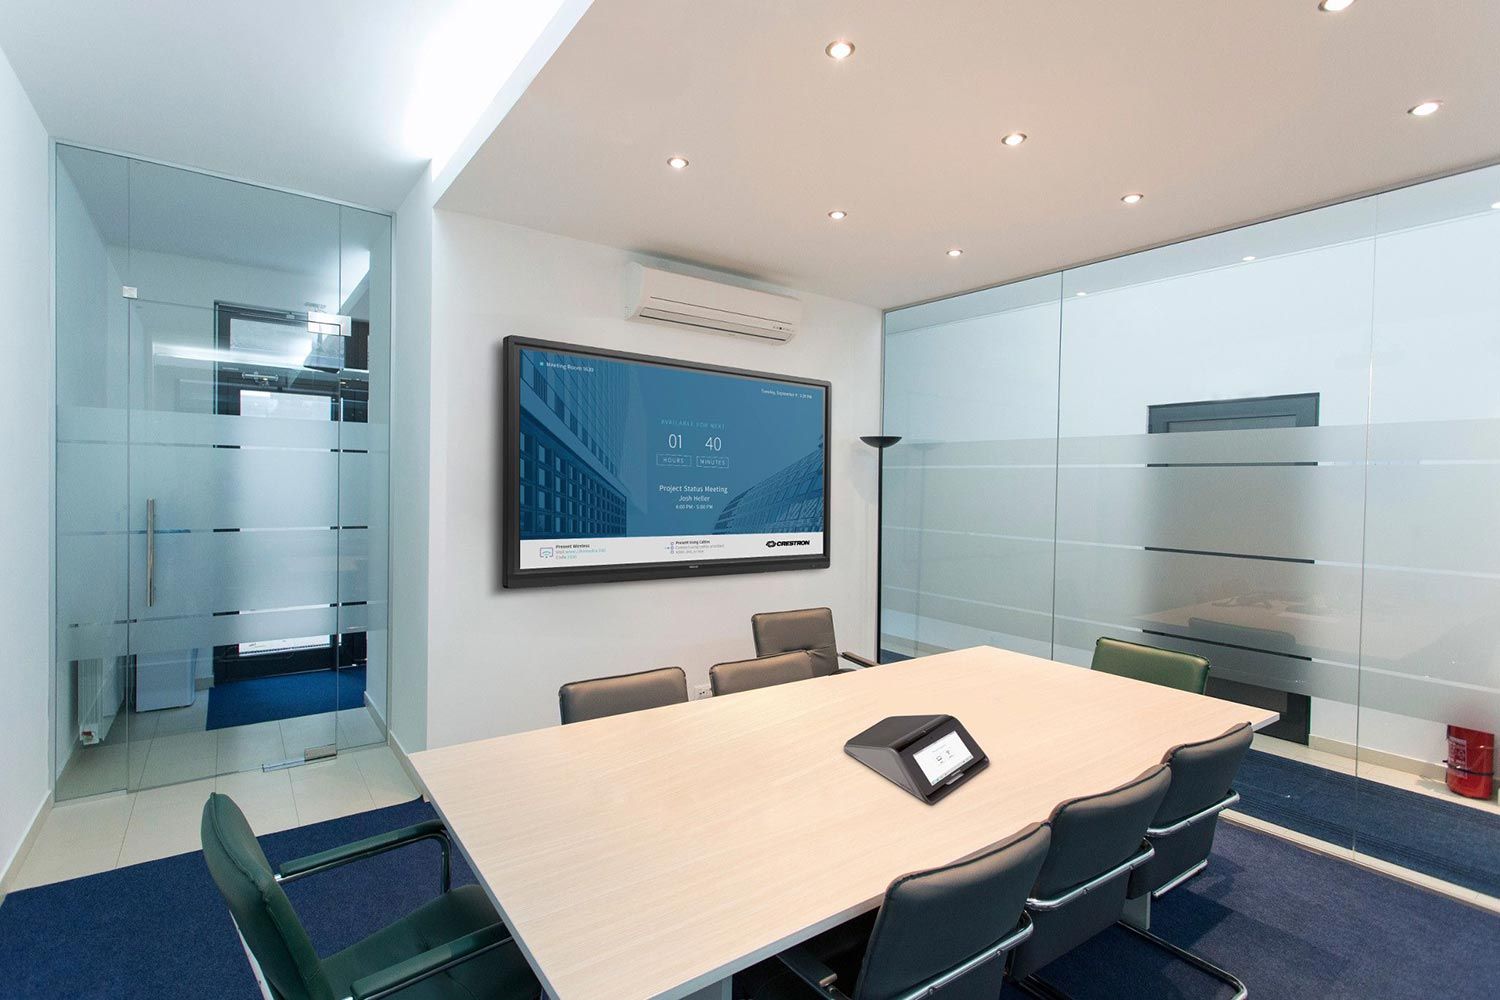 Crestron conference room control system